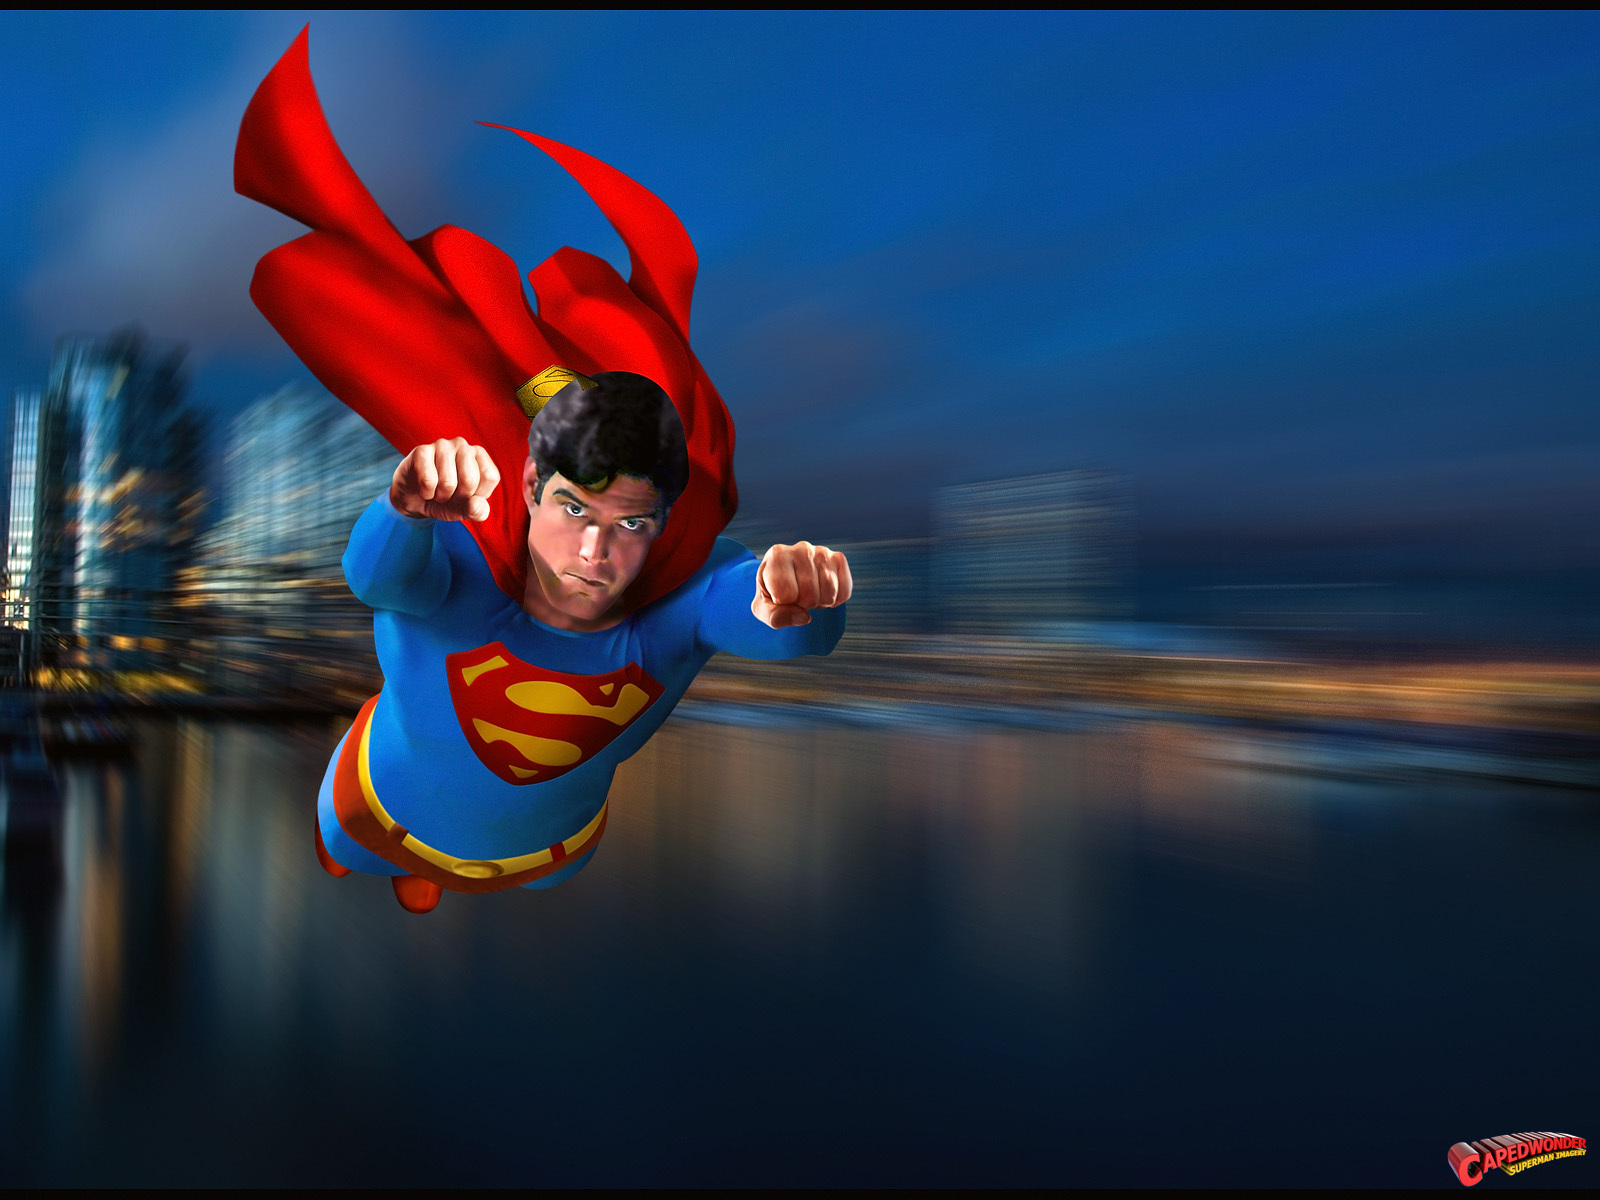 Superman The Movie Background Image For Fb Cover